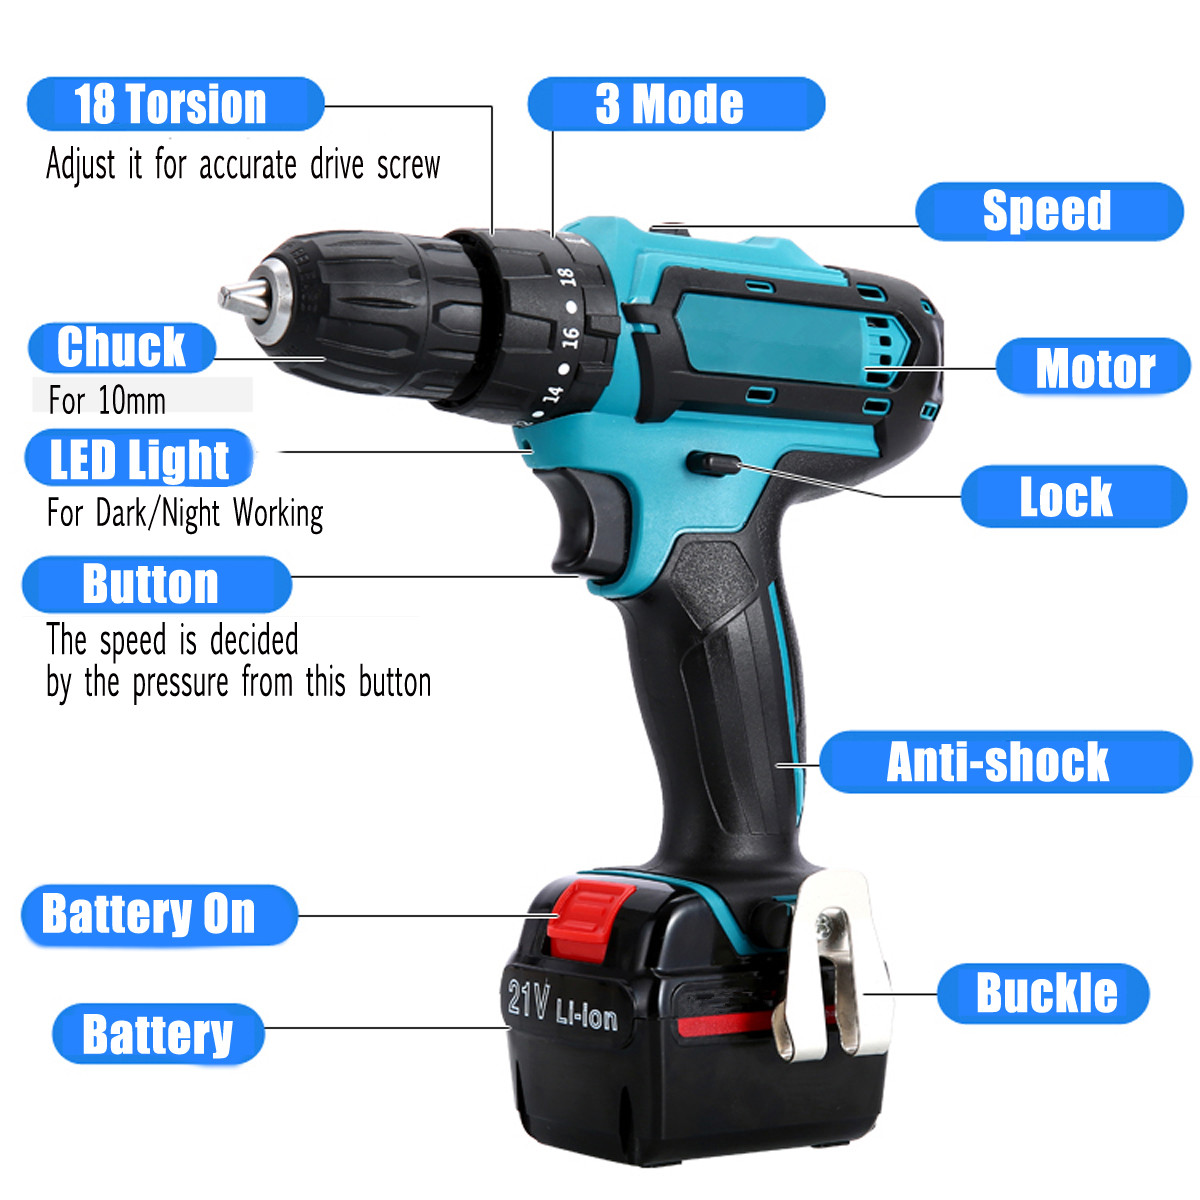 12V-Cordless-Electric-Impact-Drill-Multi-function-Hand-Hammer-Screwdriver-Lithium-Battery-Rechargabl-1452371-3